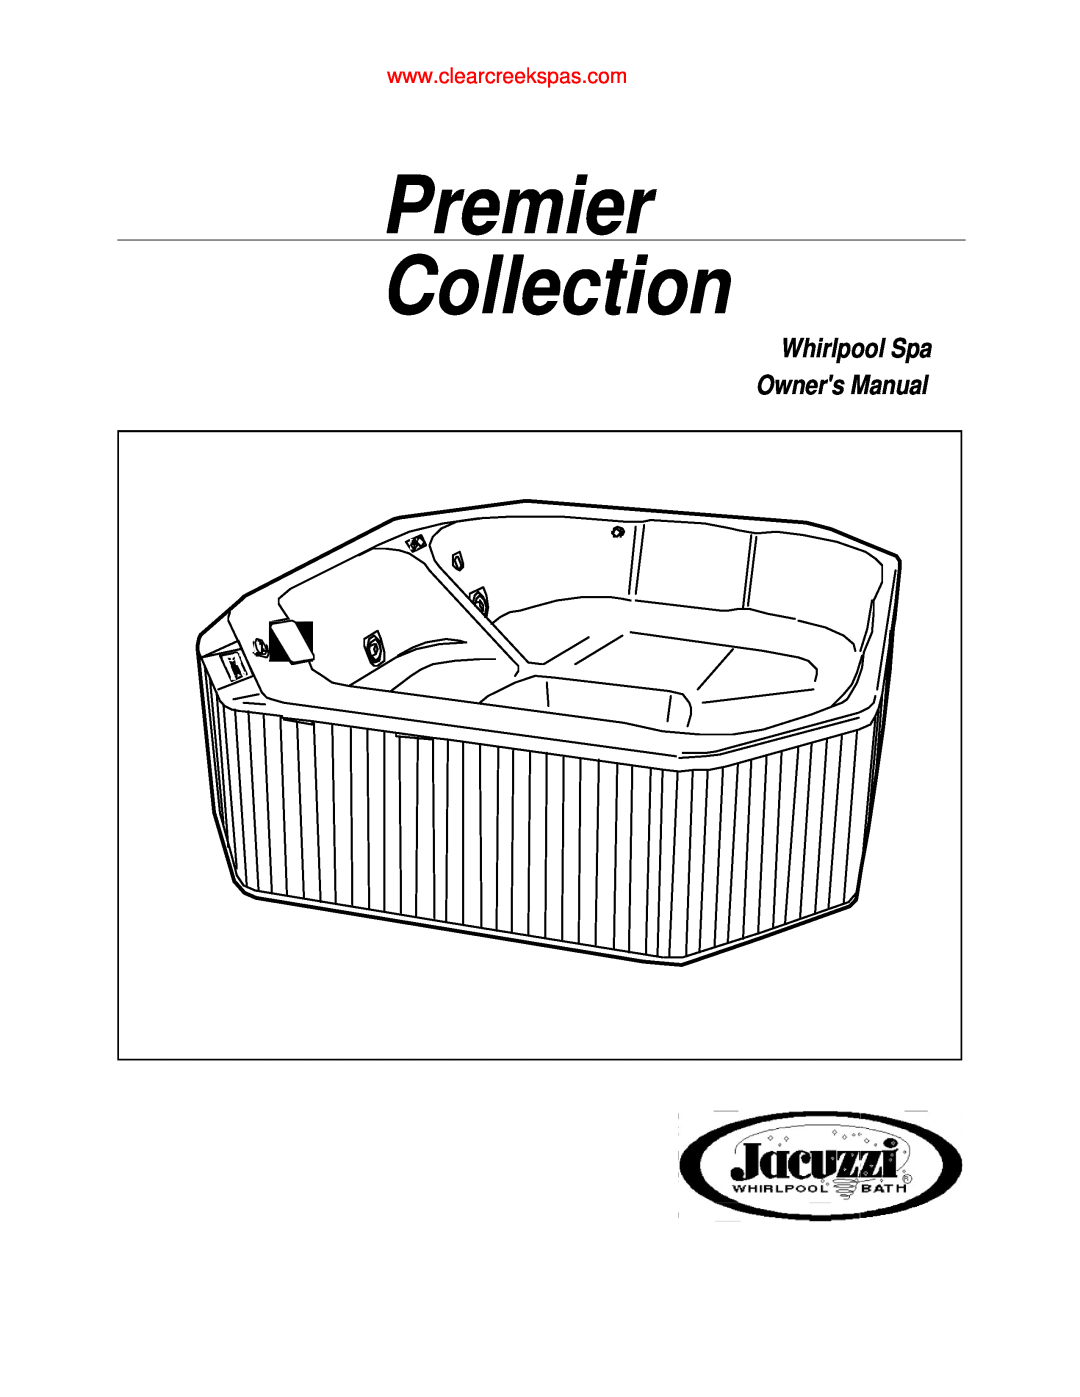 Jacuzzi owner manual Premier Collection, Whirlpool Spa Owners Manual 